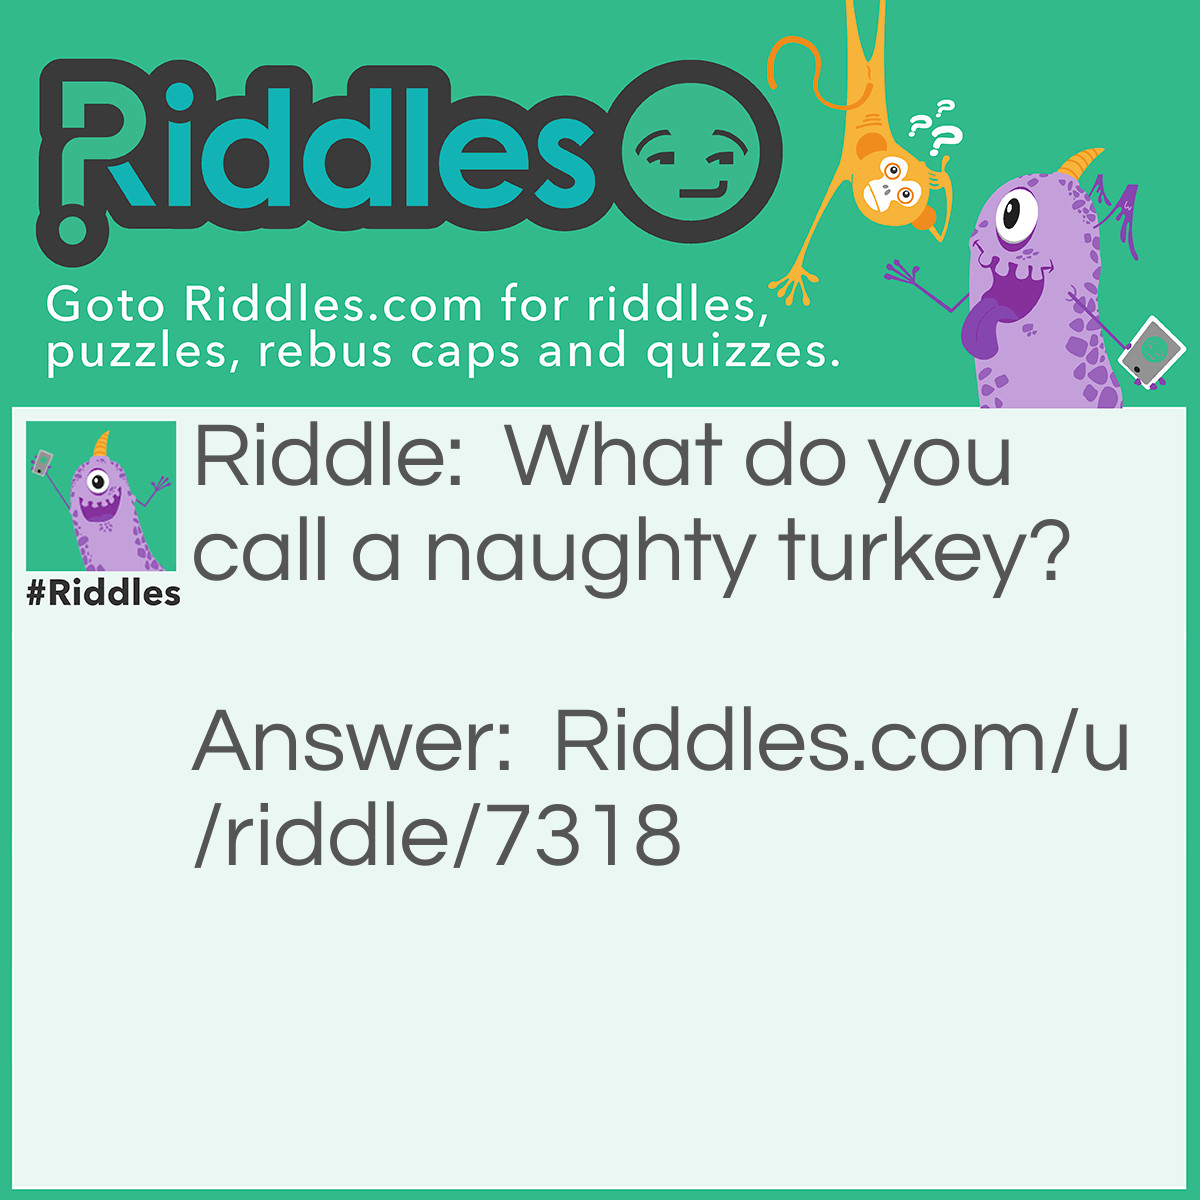 Riddle: What do you call a naughty turkey? Answer: Dinner.